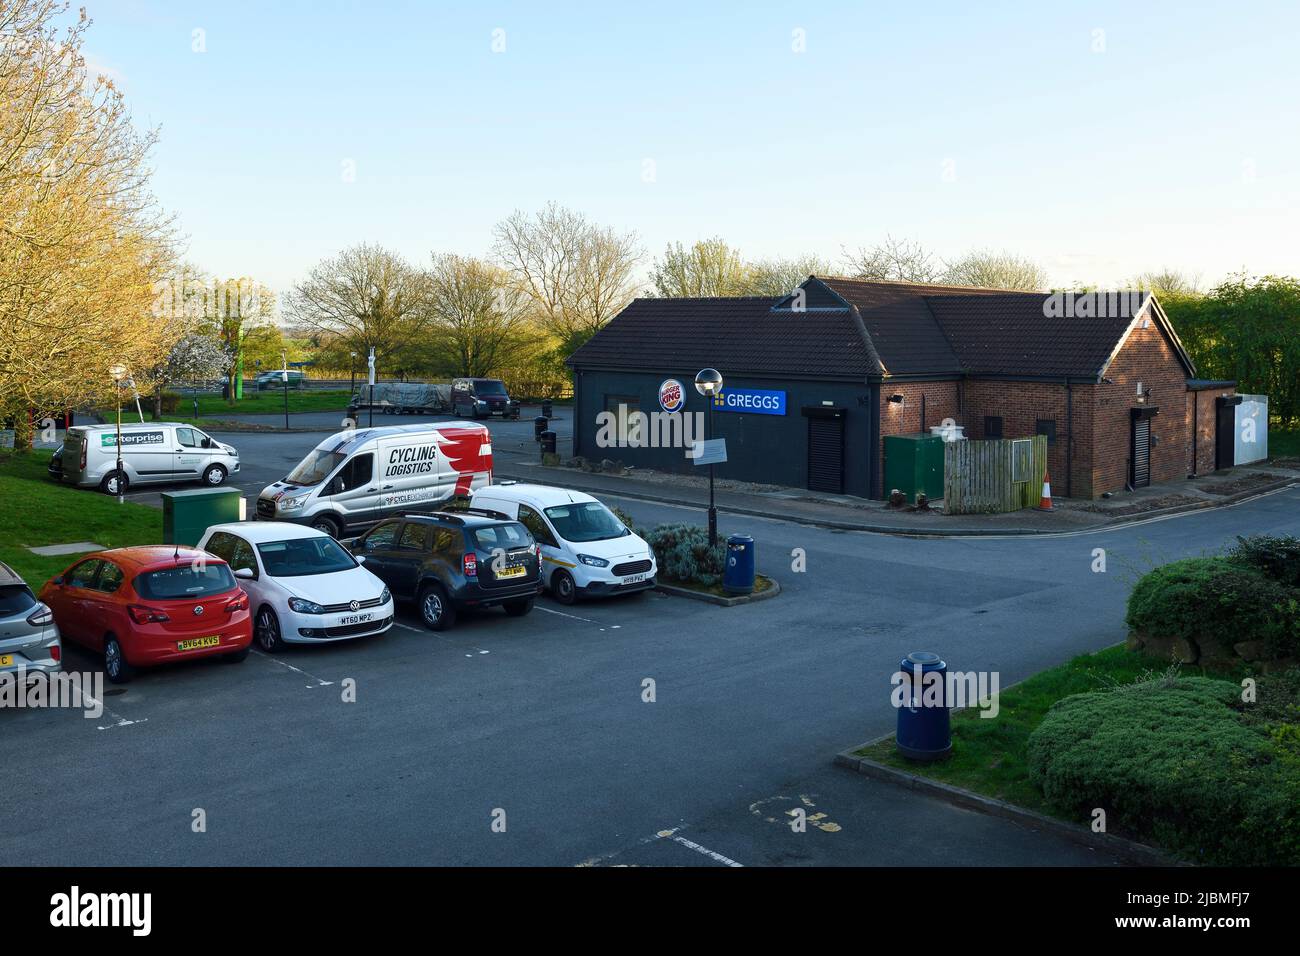 The view across a small retail carpark in Yorkshire UK Stock Photo